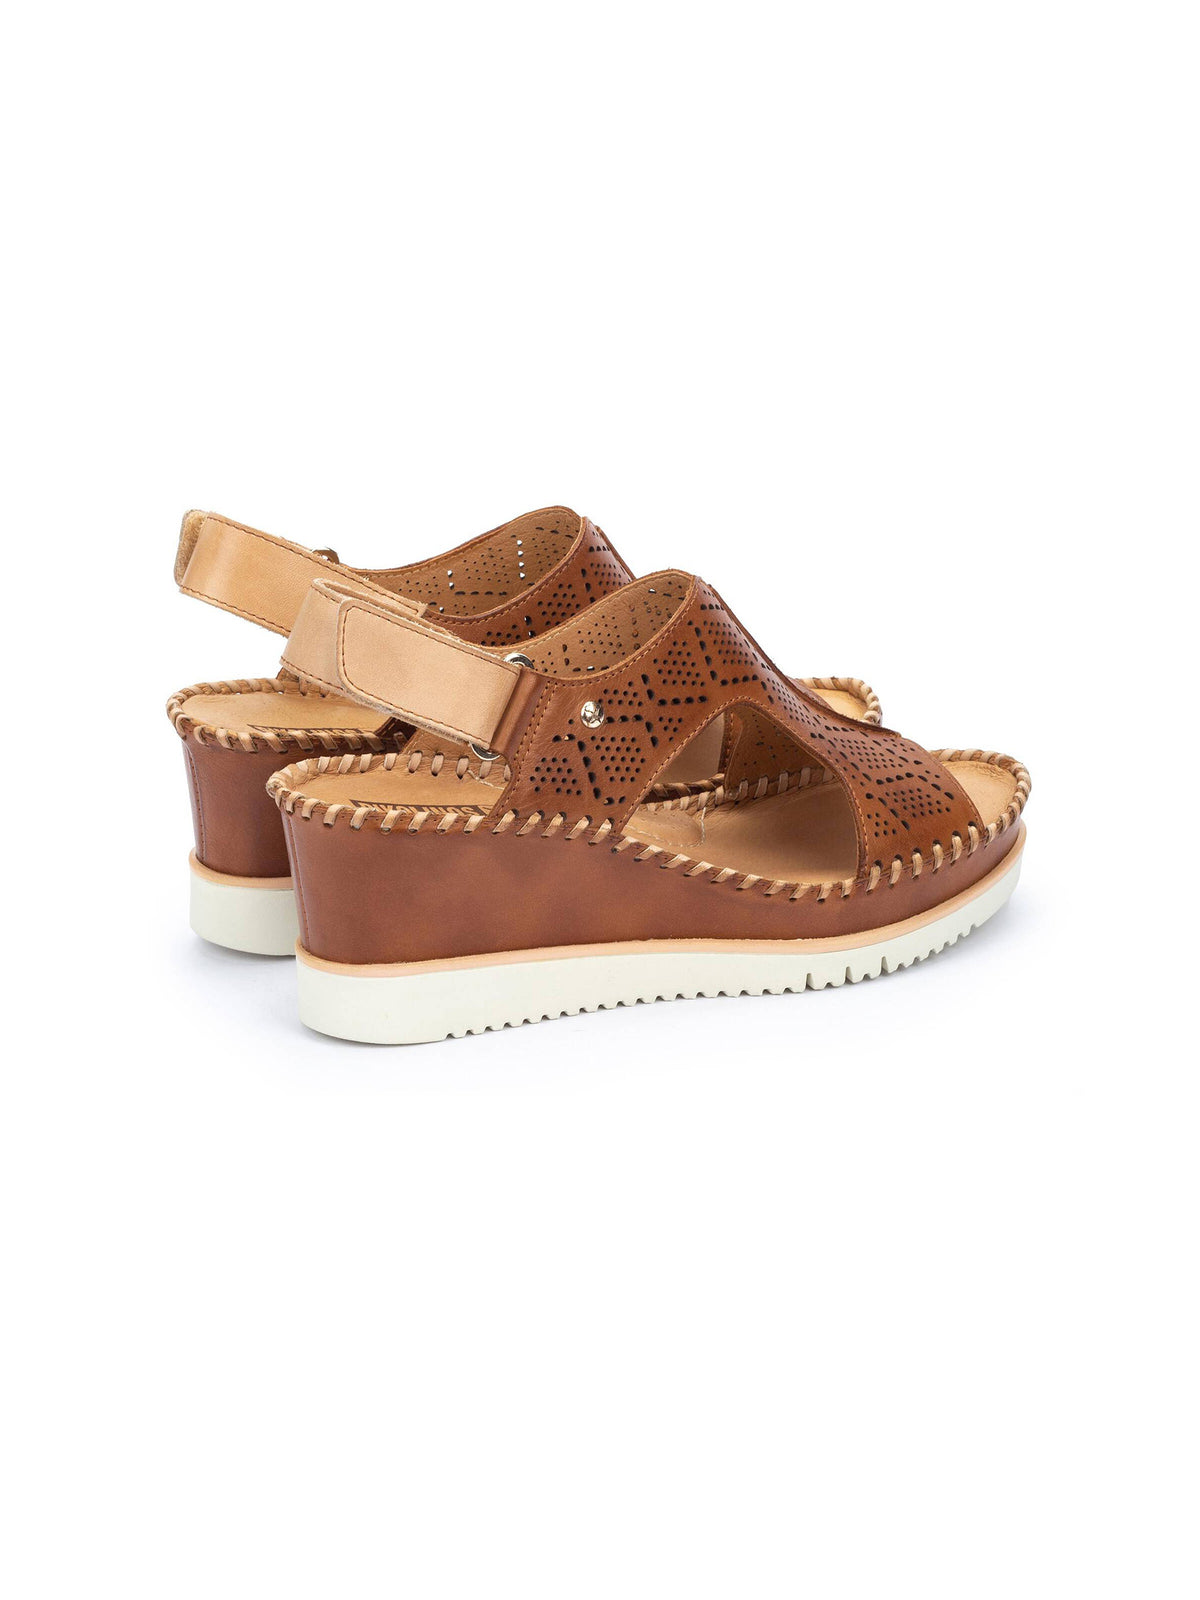 pikolinos aguadulce wedge sandals in brandy-back pair view